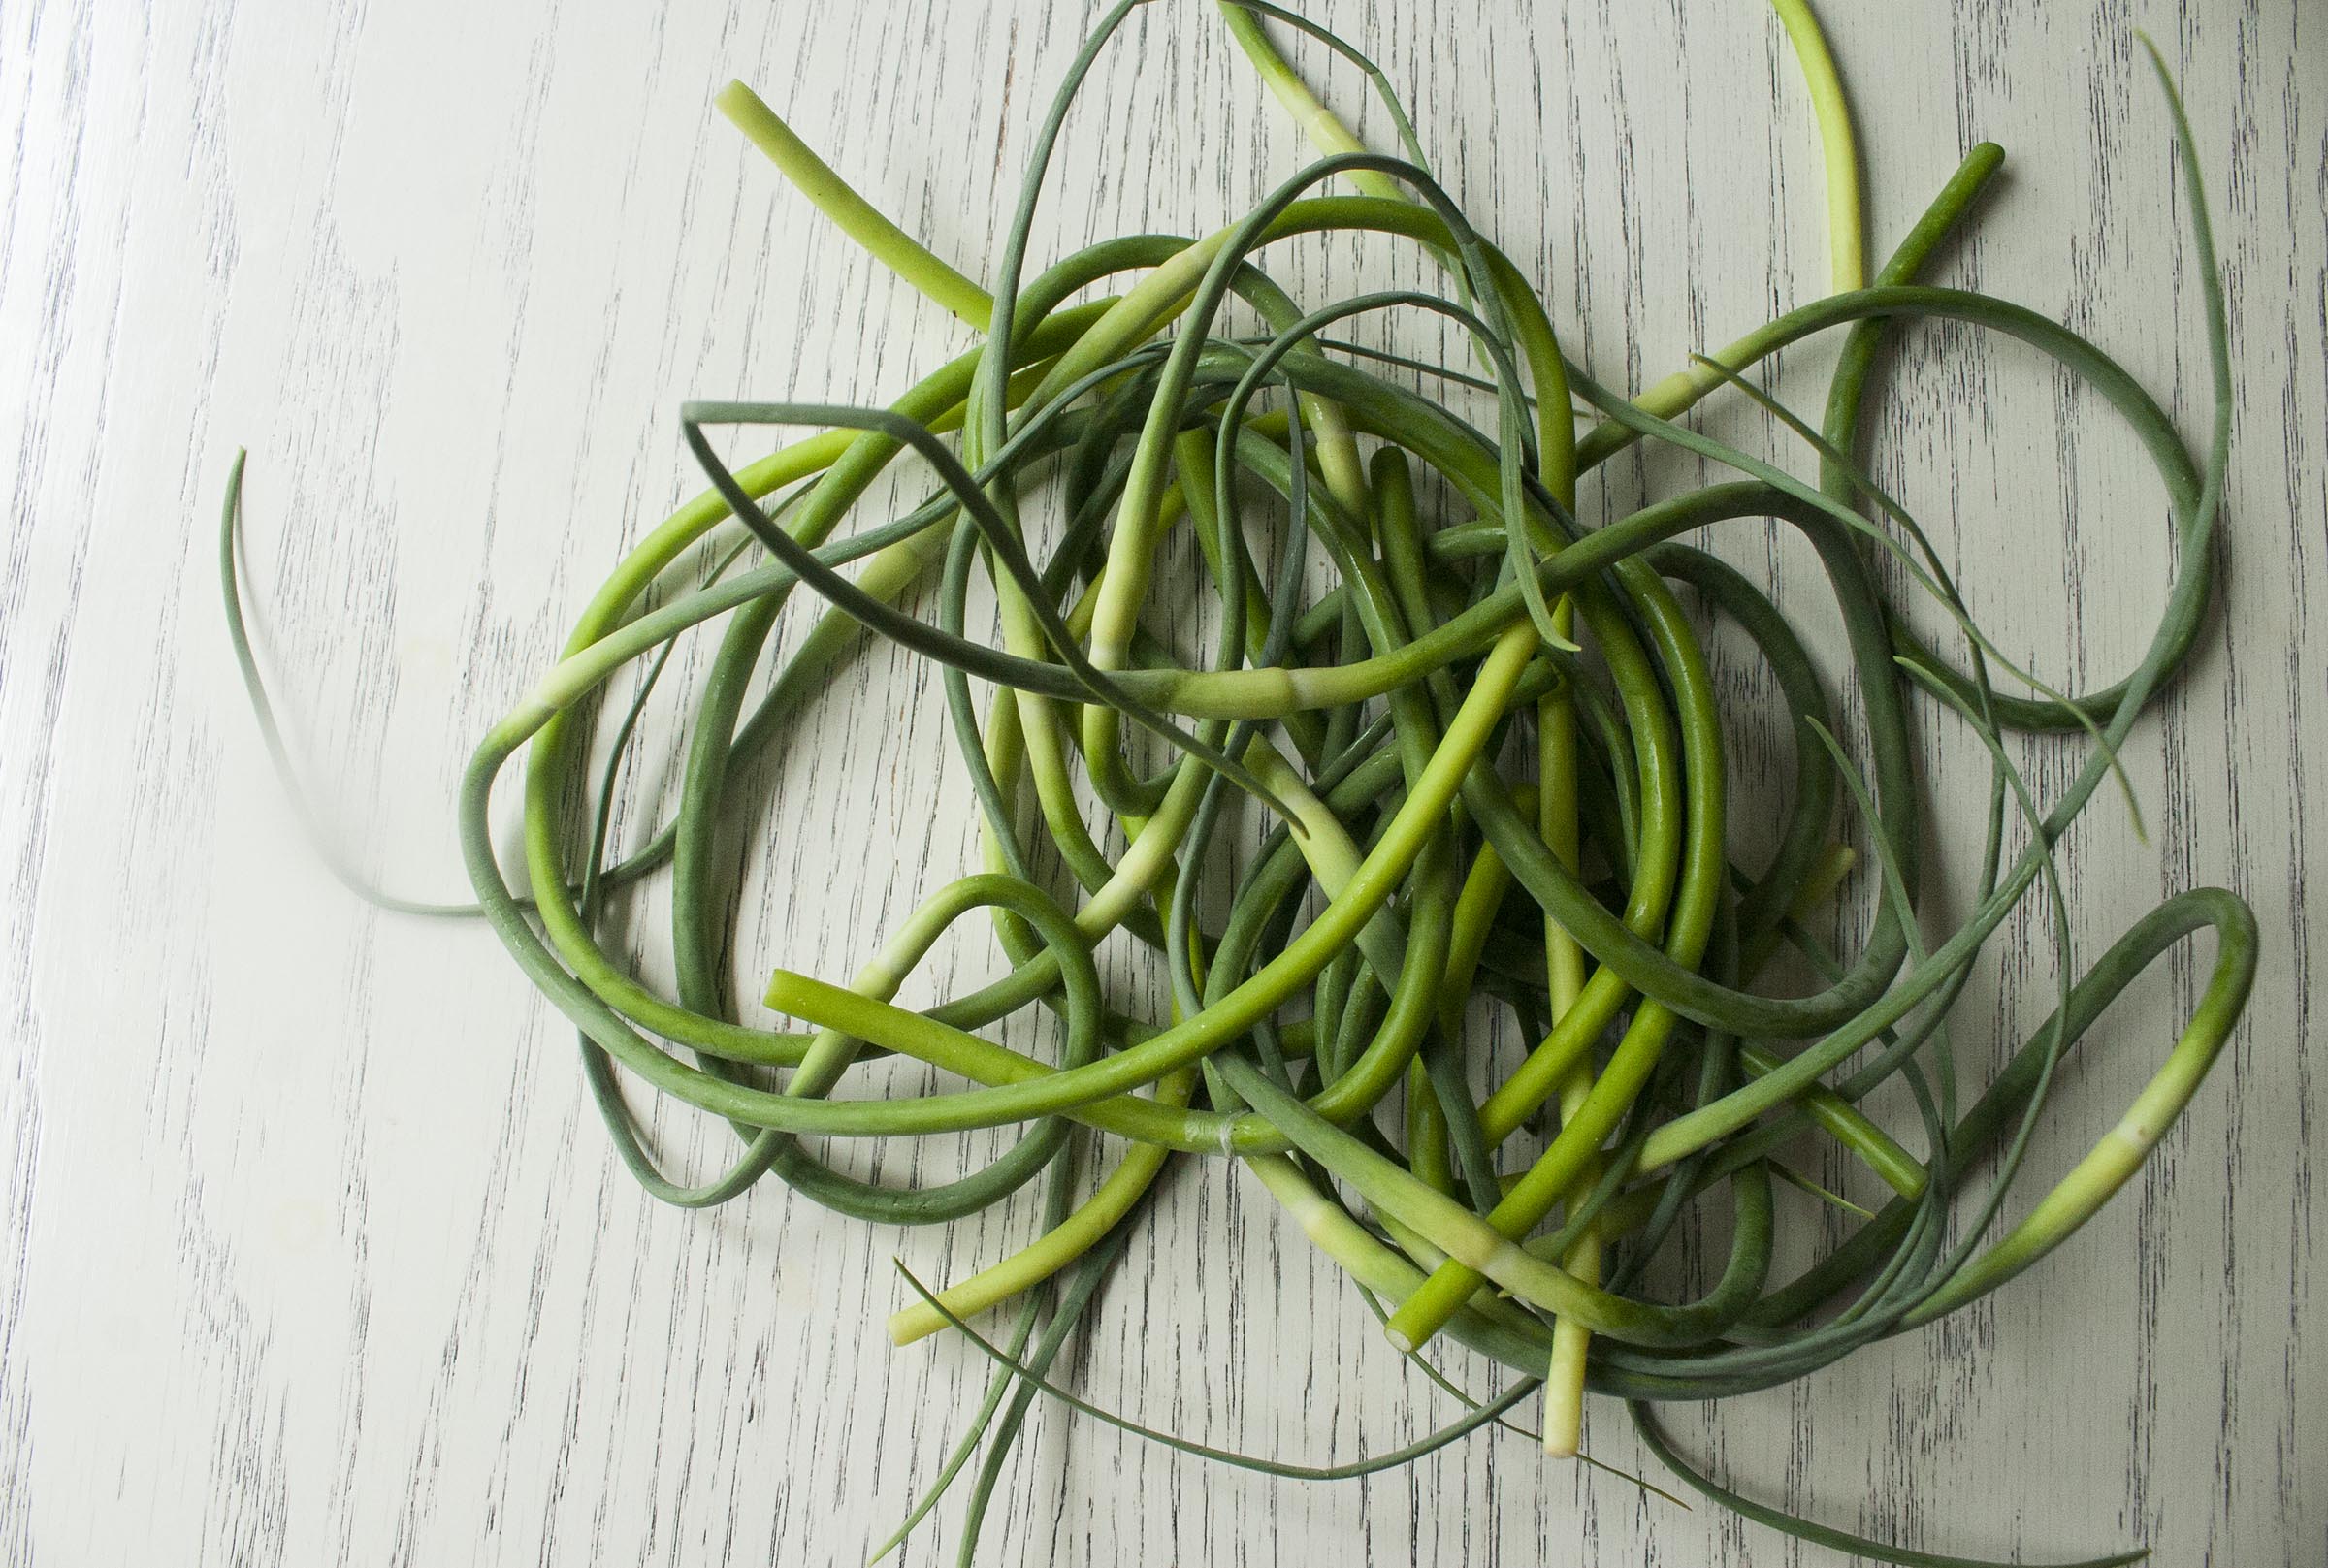 Garlic Scapes from the Farmers Market for Garlic Scape & Hemp Seed Pesto. www.lifeaswecookit.com